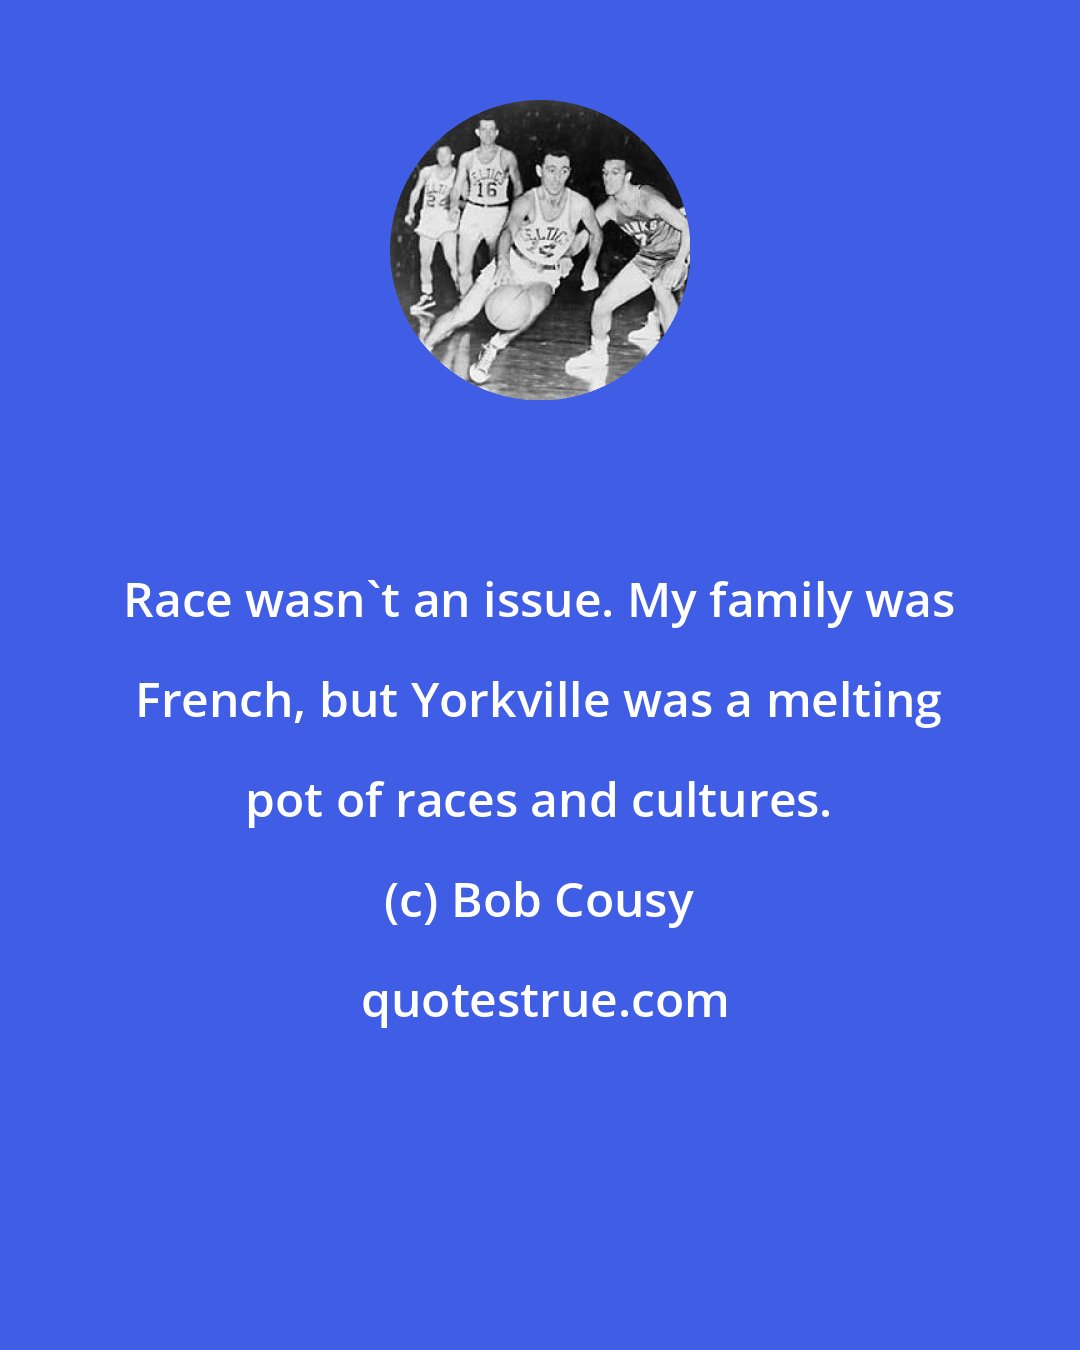 Bob Cousy: Race wasn't an issue. My family was French, but Yorkville was a melting pot of races and cultures.